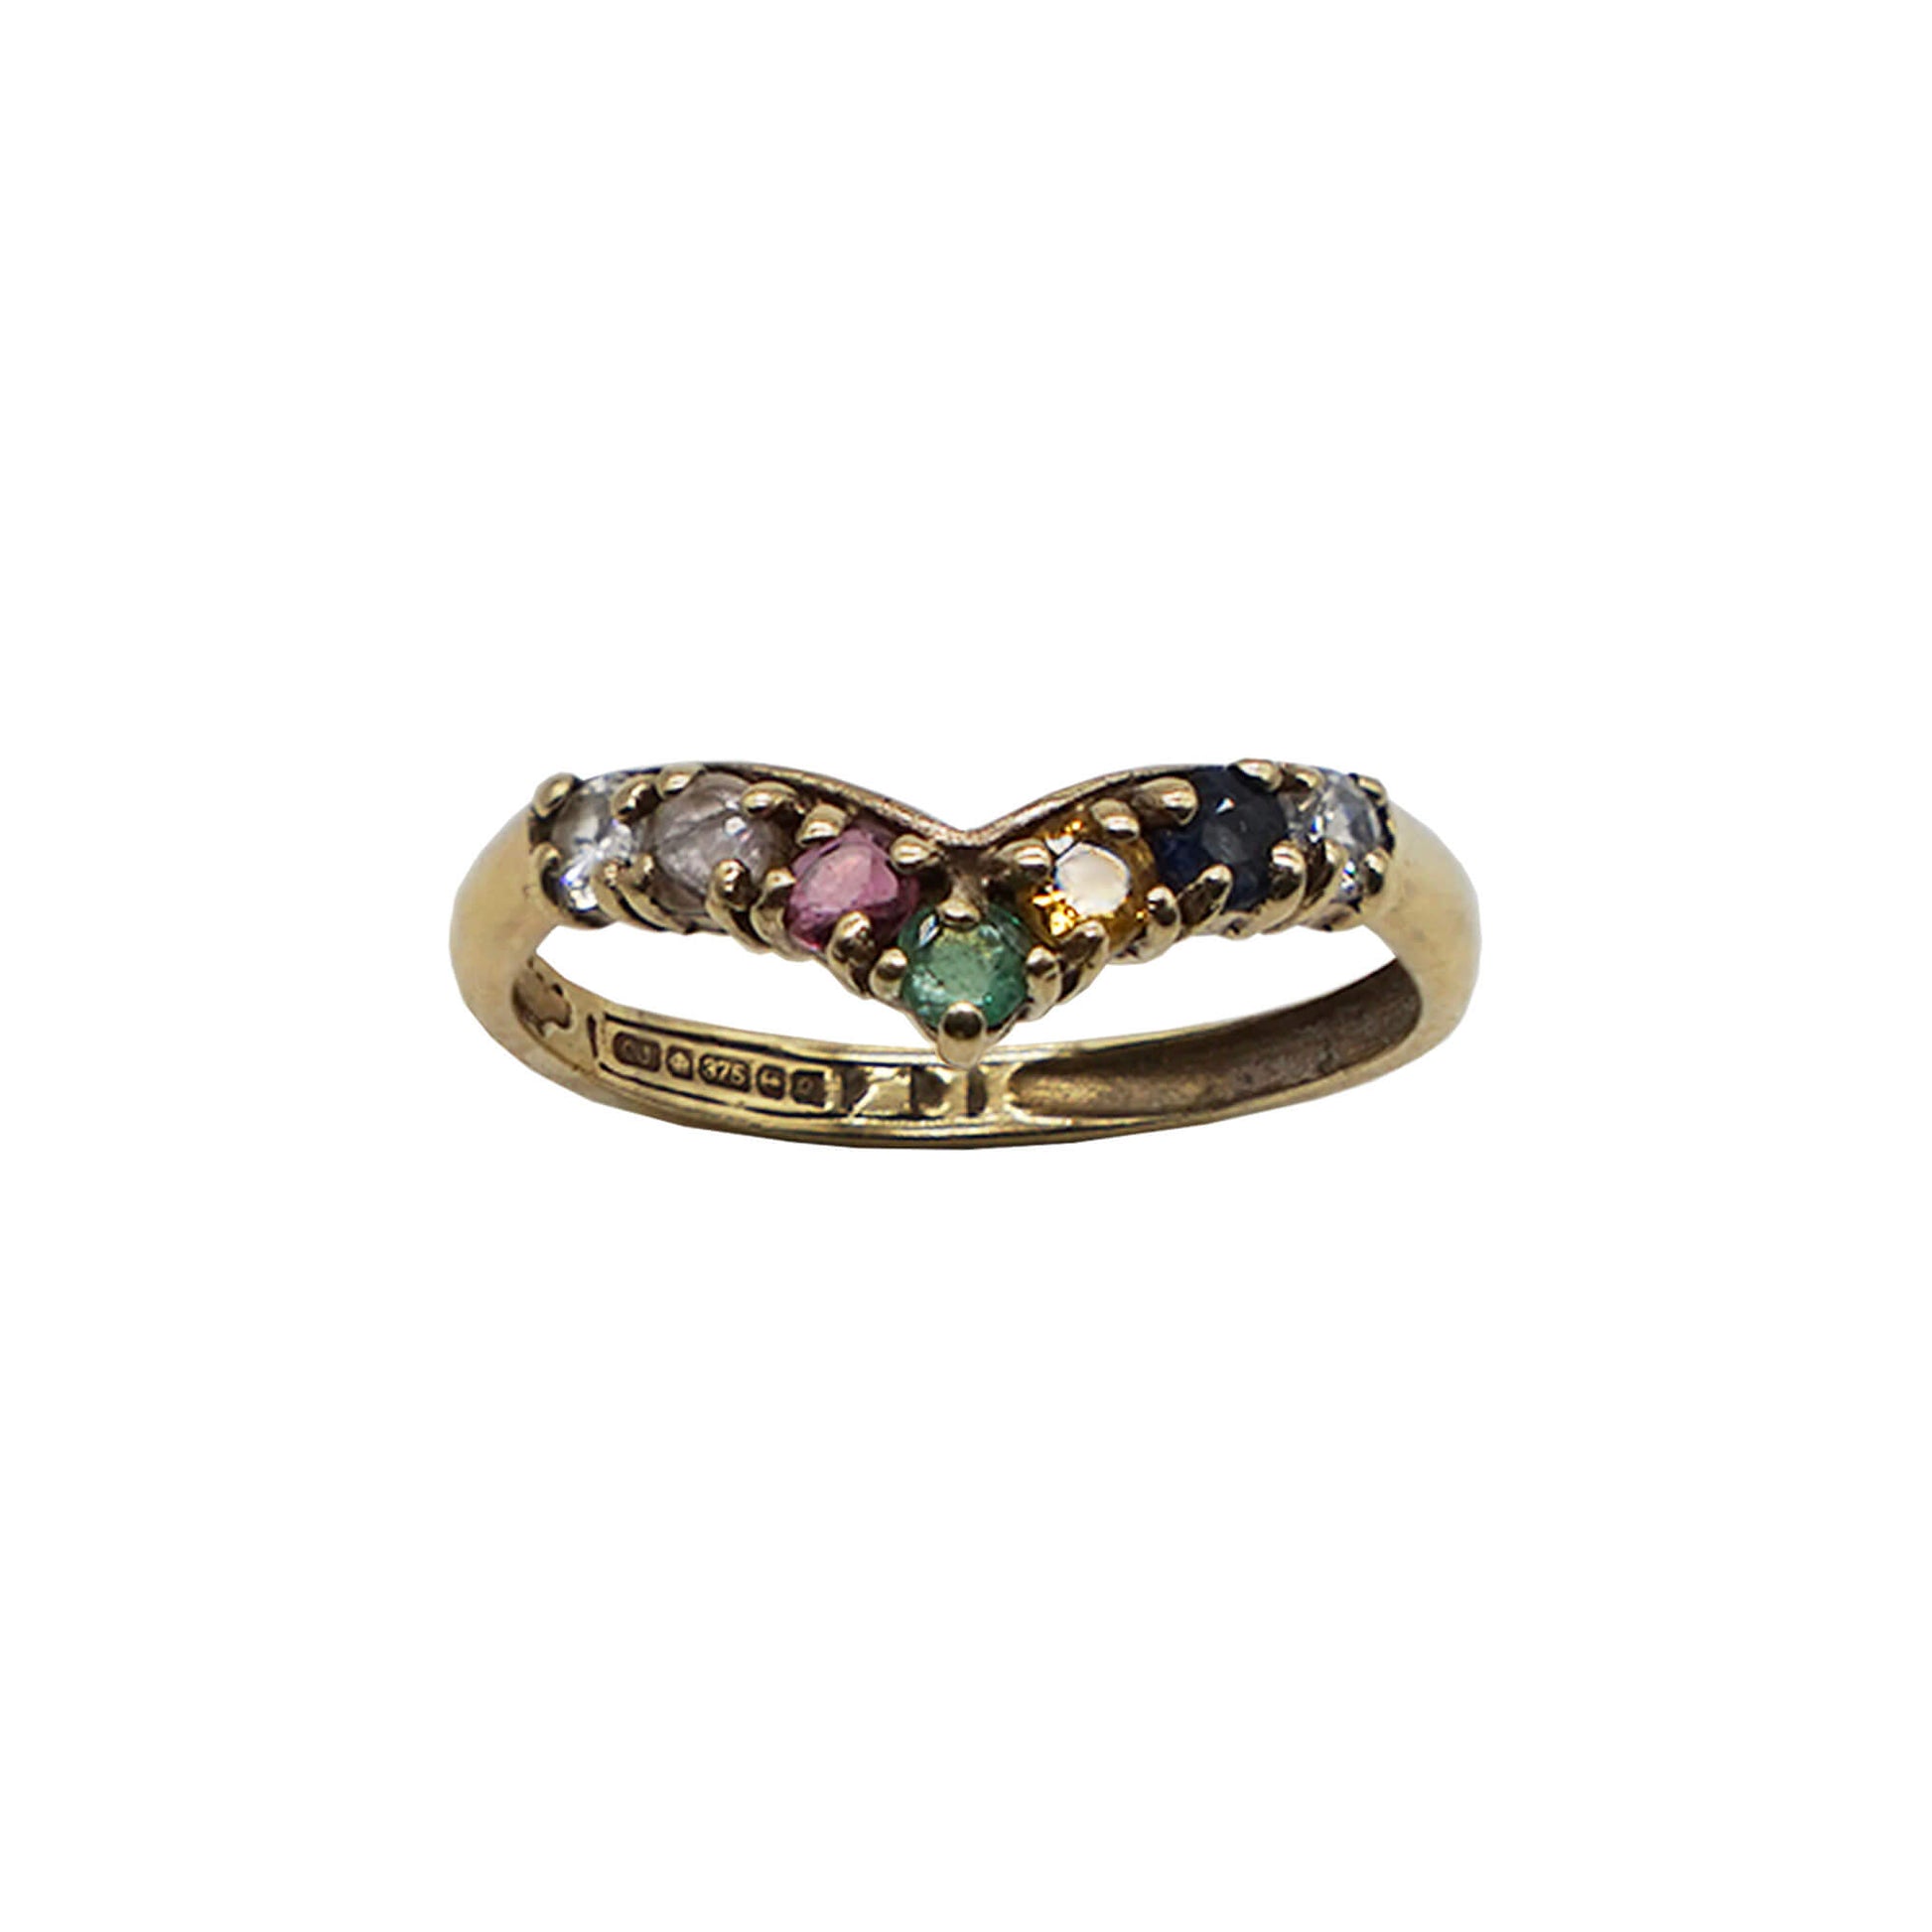 VINTAGE 9K GOLD RING WITH MULTICOLOURED STONES.